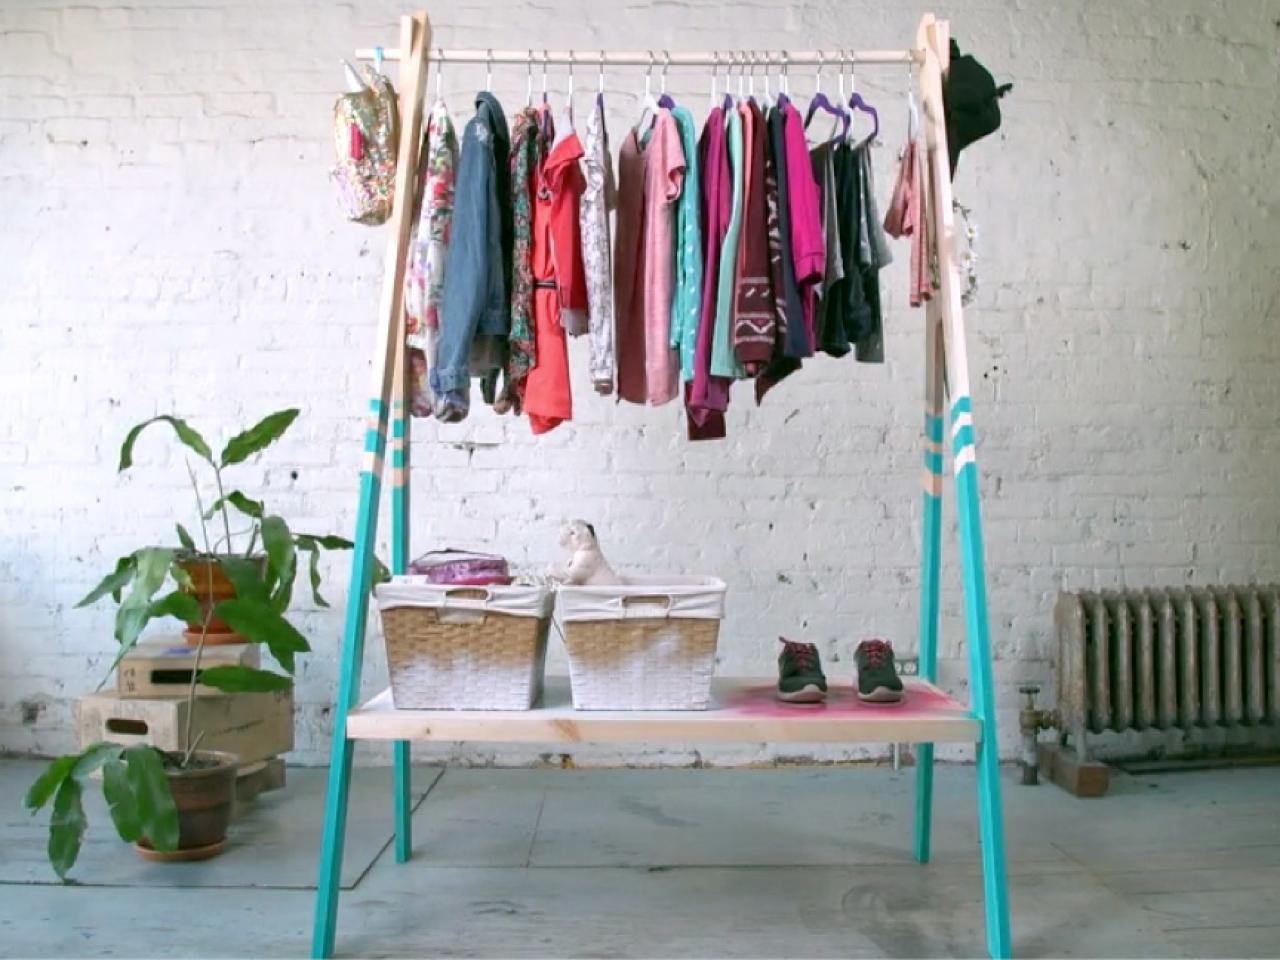 How To Build An A Frame Clothing Rack Diy, Wooden Clothes Rack Plans